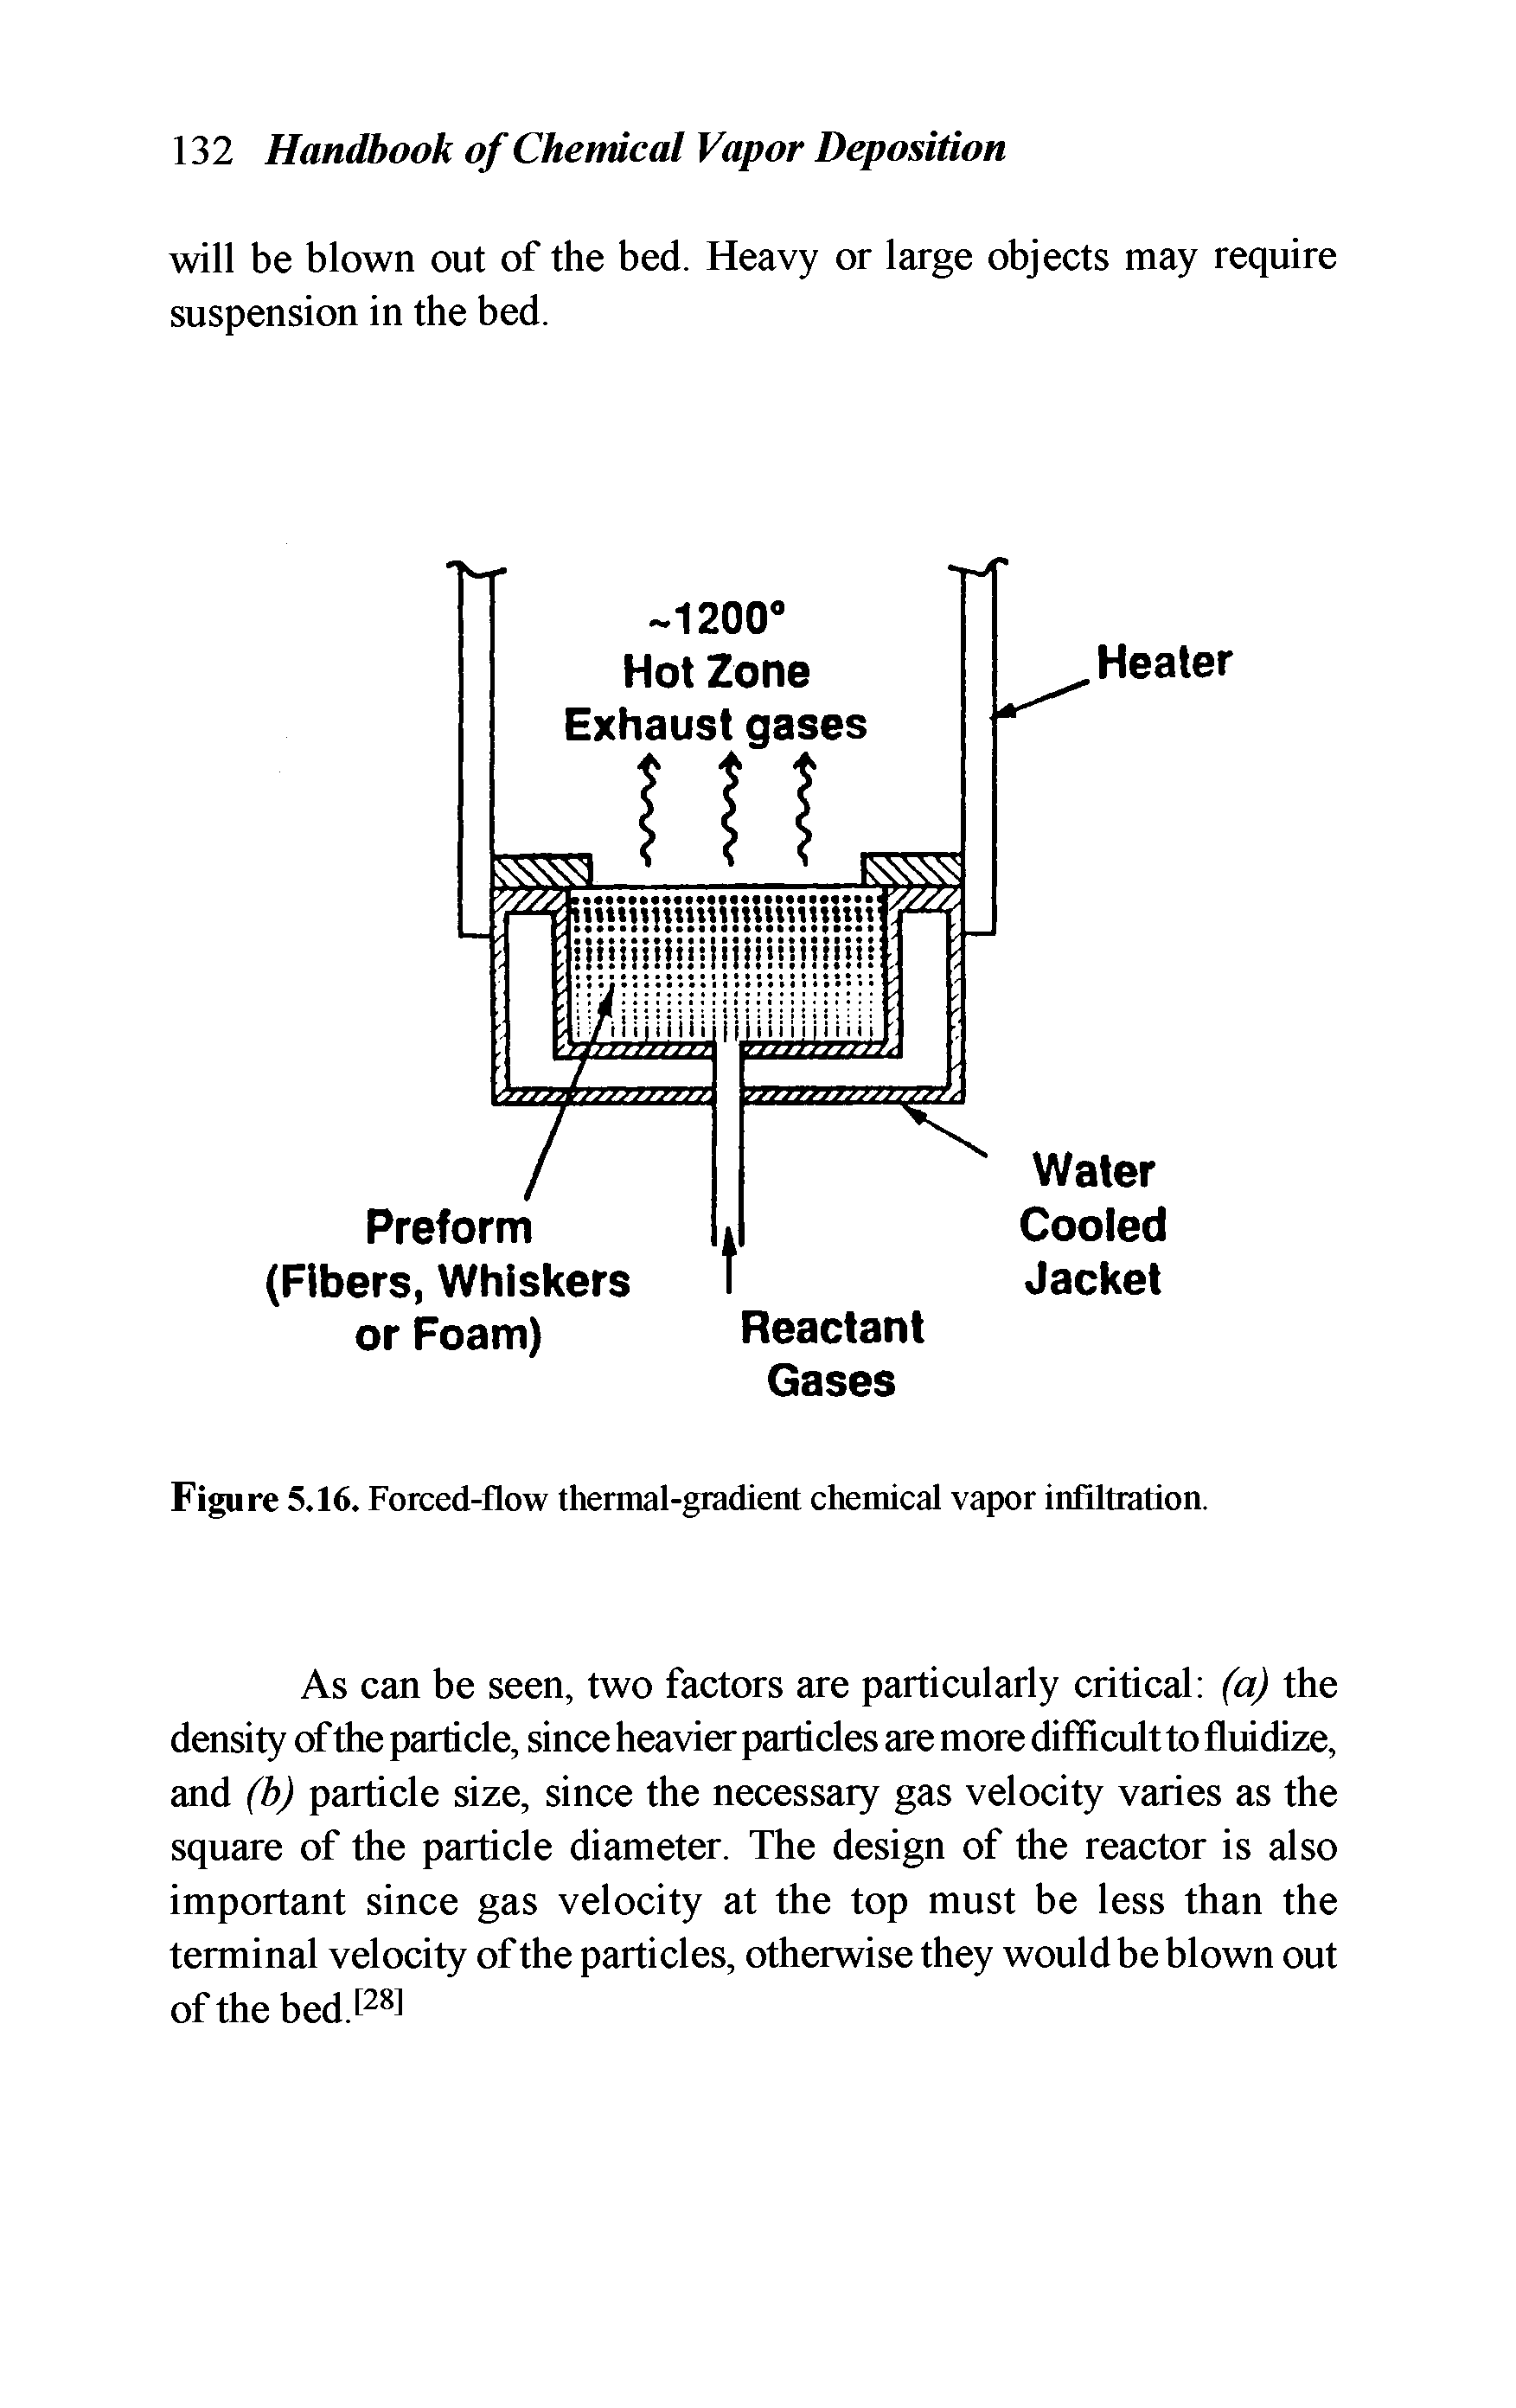 Figure 5.16. Forced-flow thermal-gradient chemical vapor infiltration.